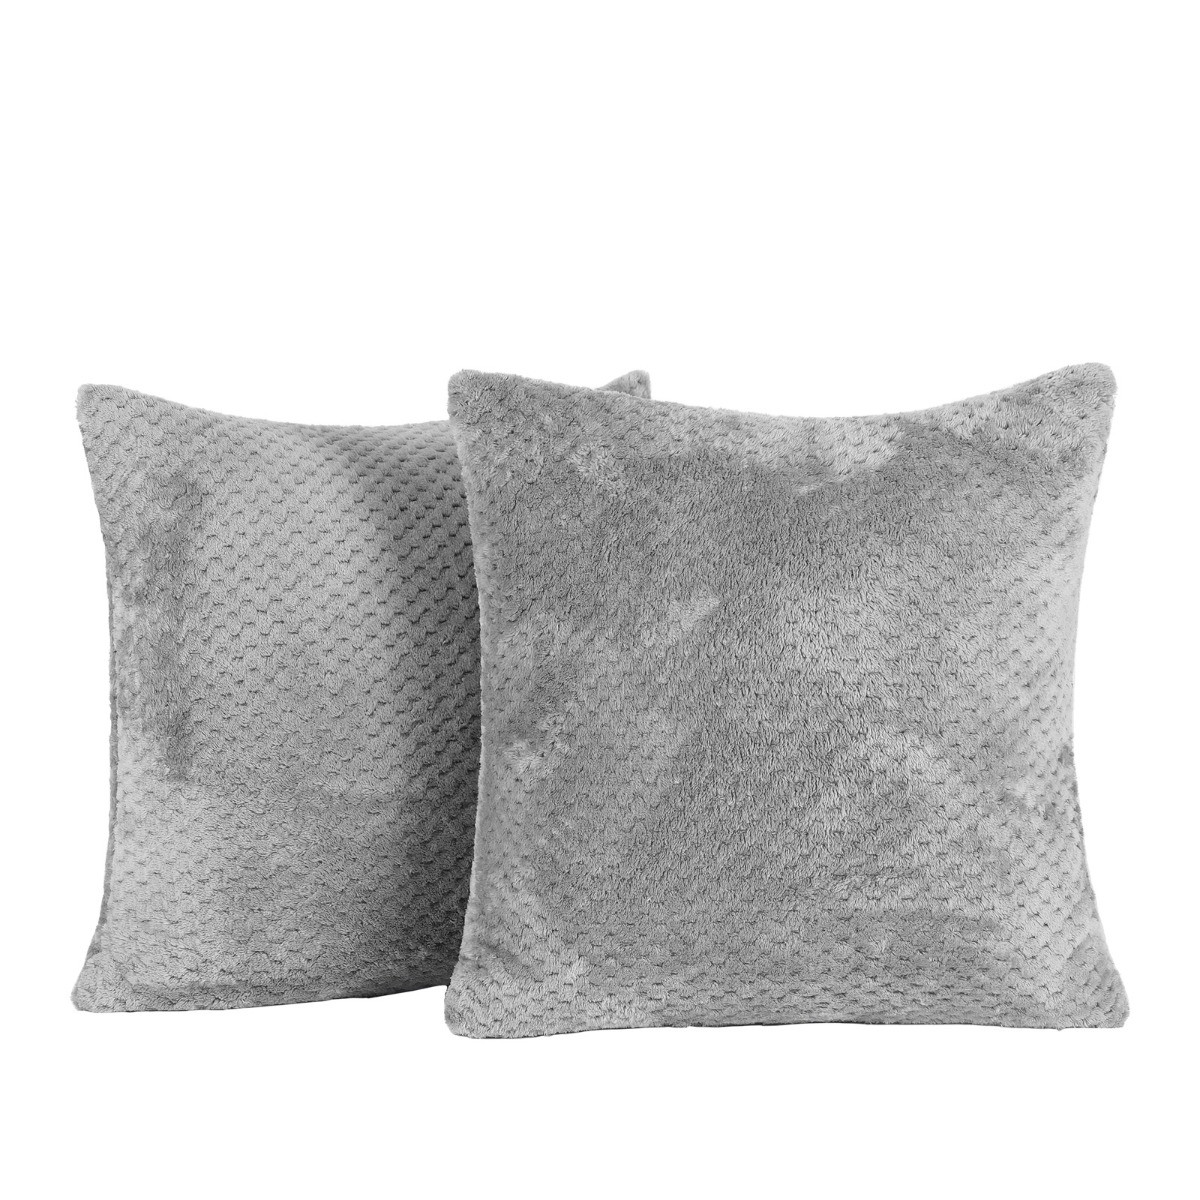 Brentfords 2 Pack Waffle Fleece Cushion Covers, Charcoal - 45 x 45cm>